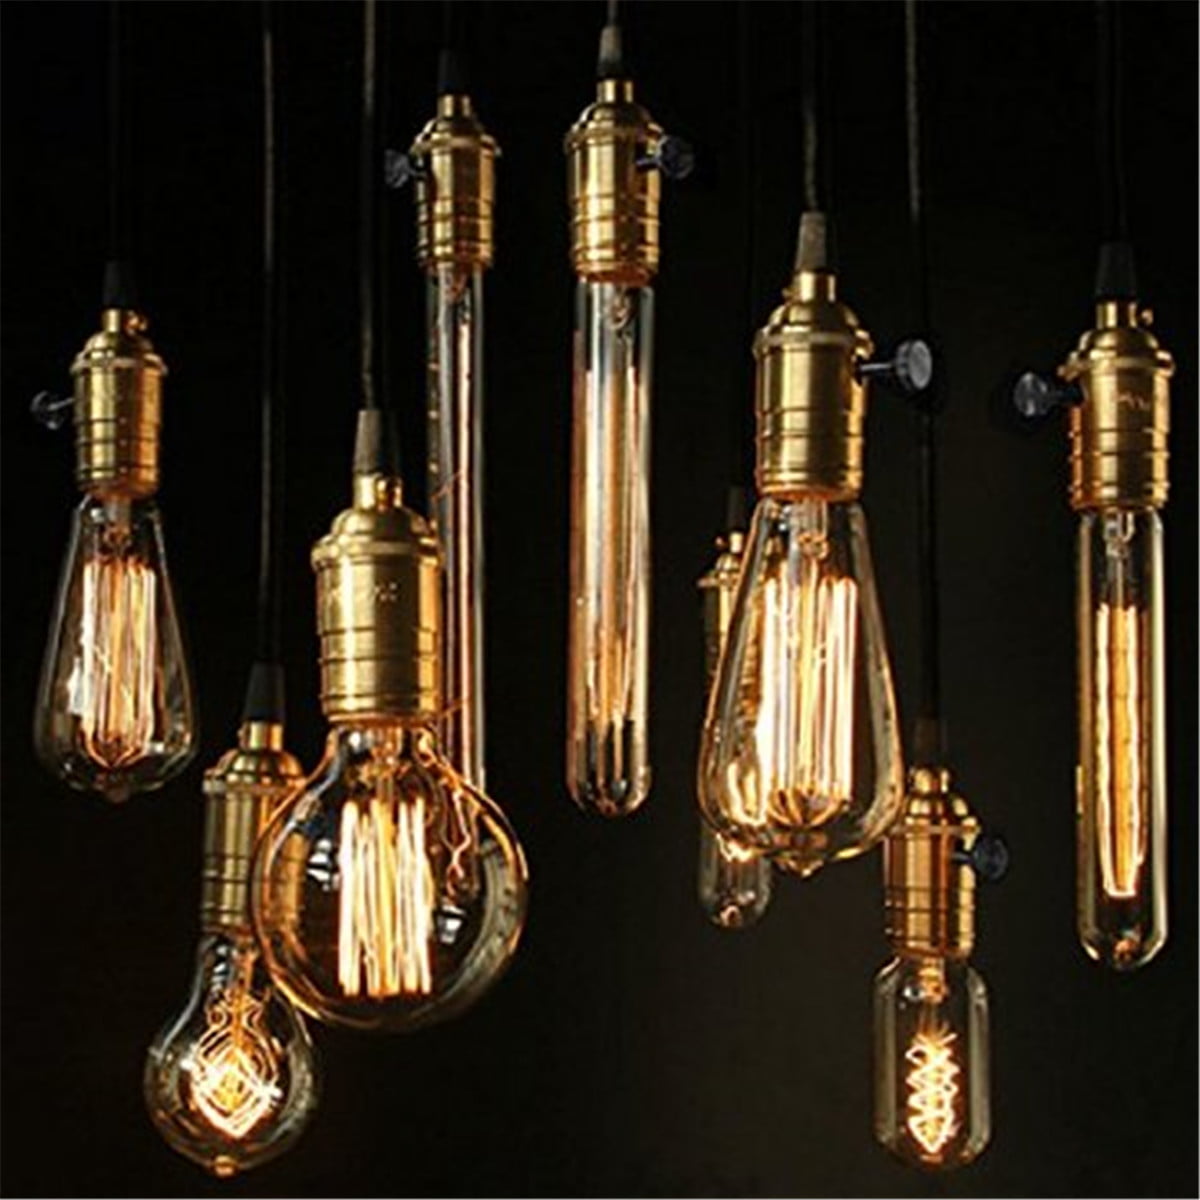 HU Fun life E27 Edison Ceiling Light Vintage Pendant Light Fitting Lamp Holder with 1Meter Cable 1 Pack Red Bronze 